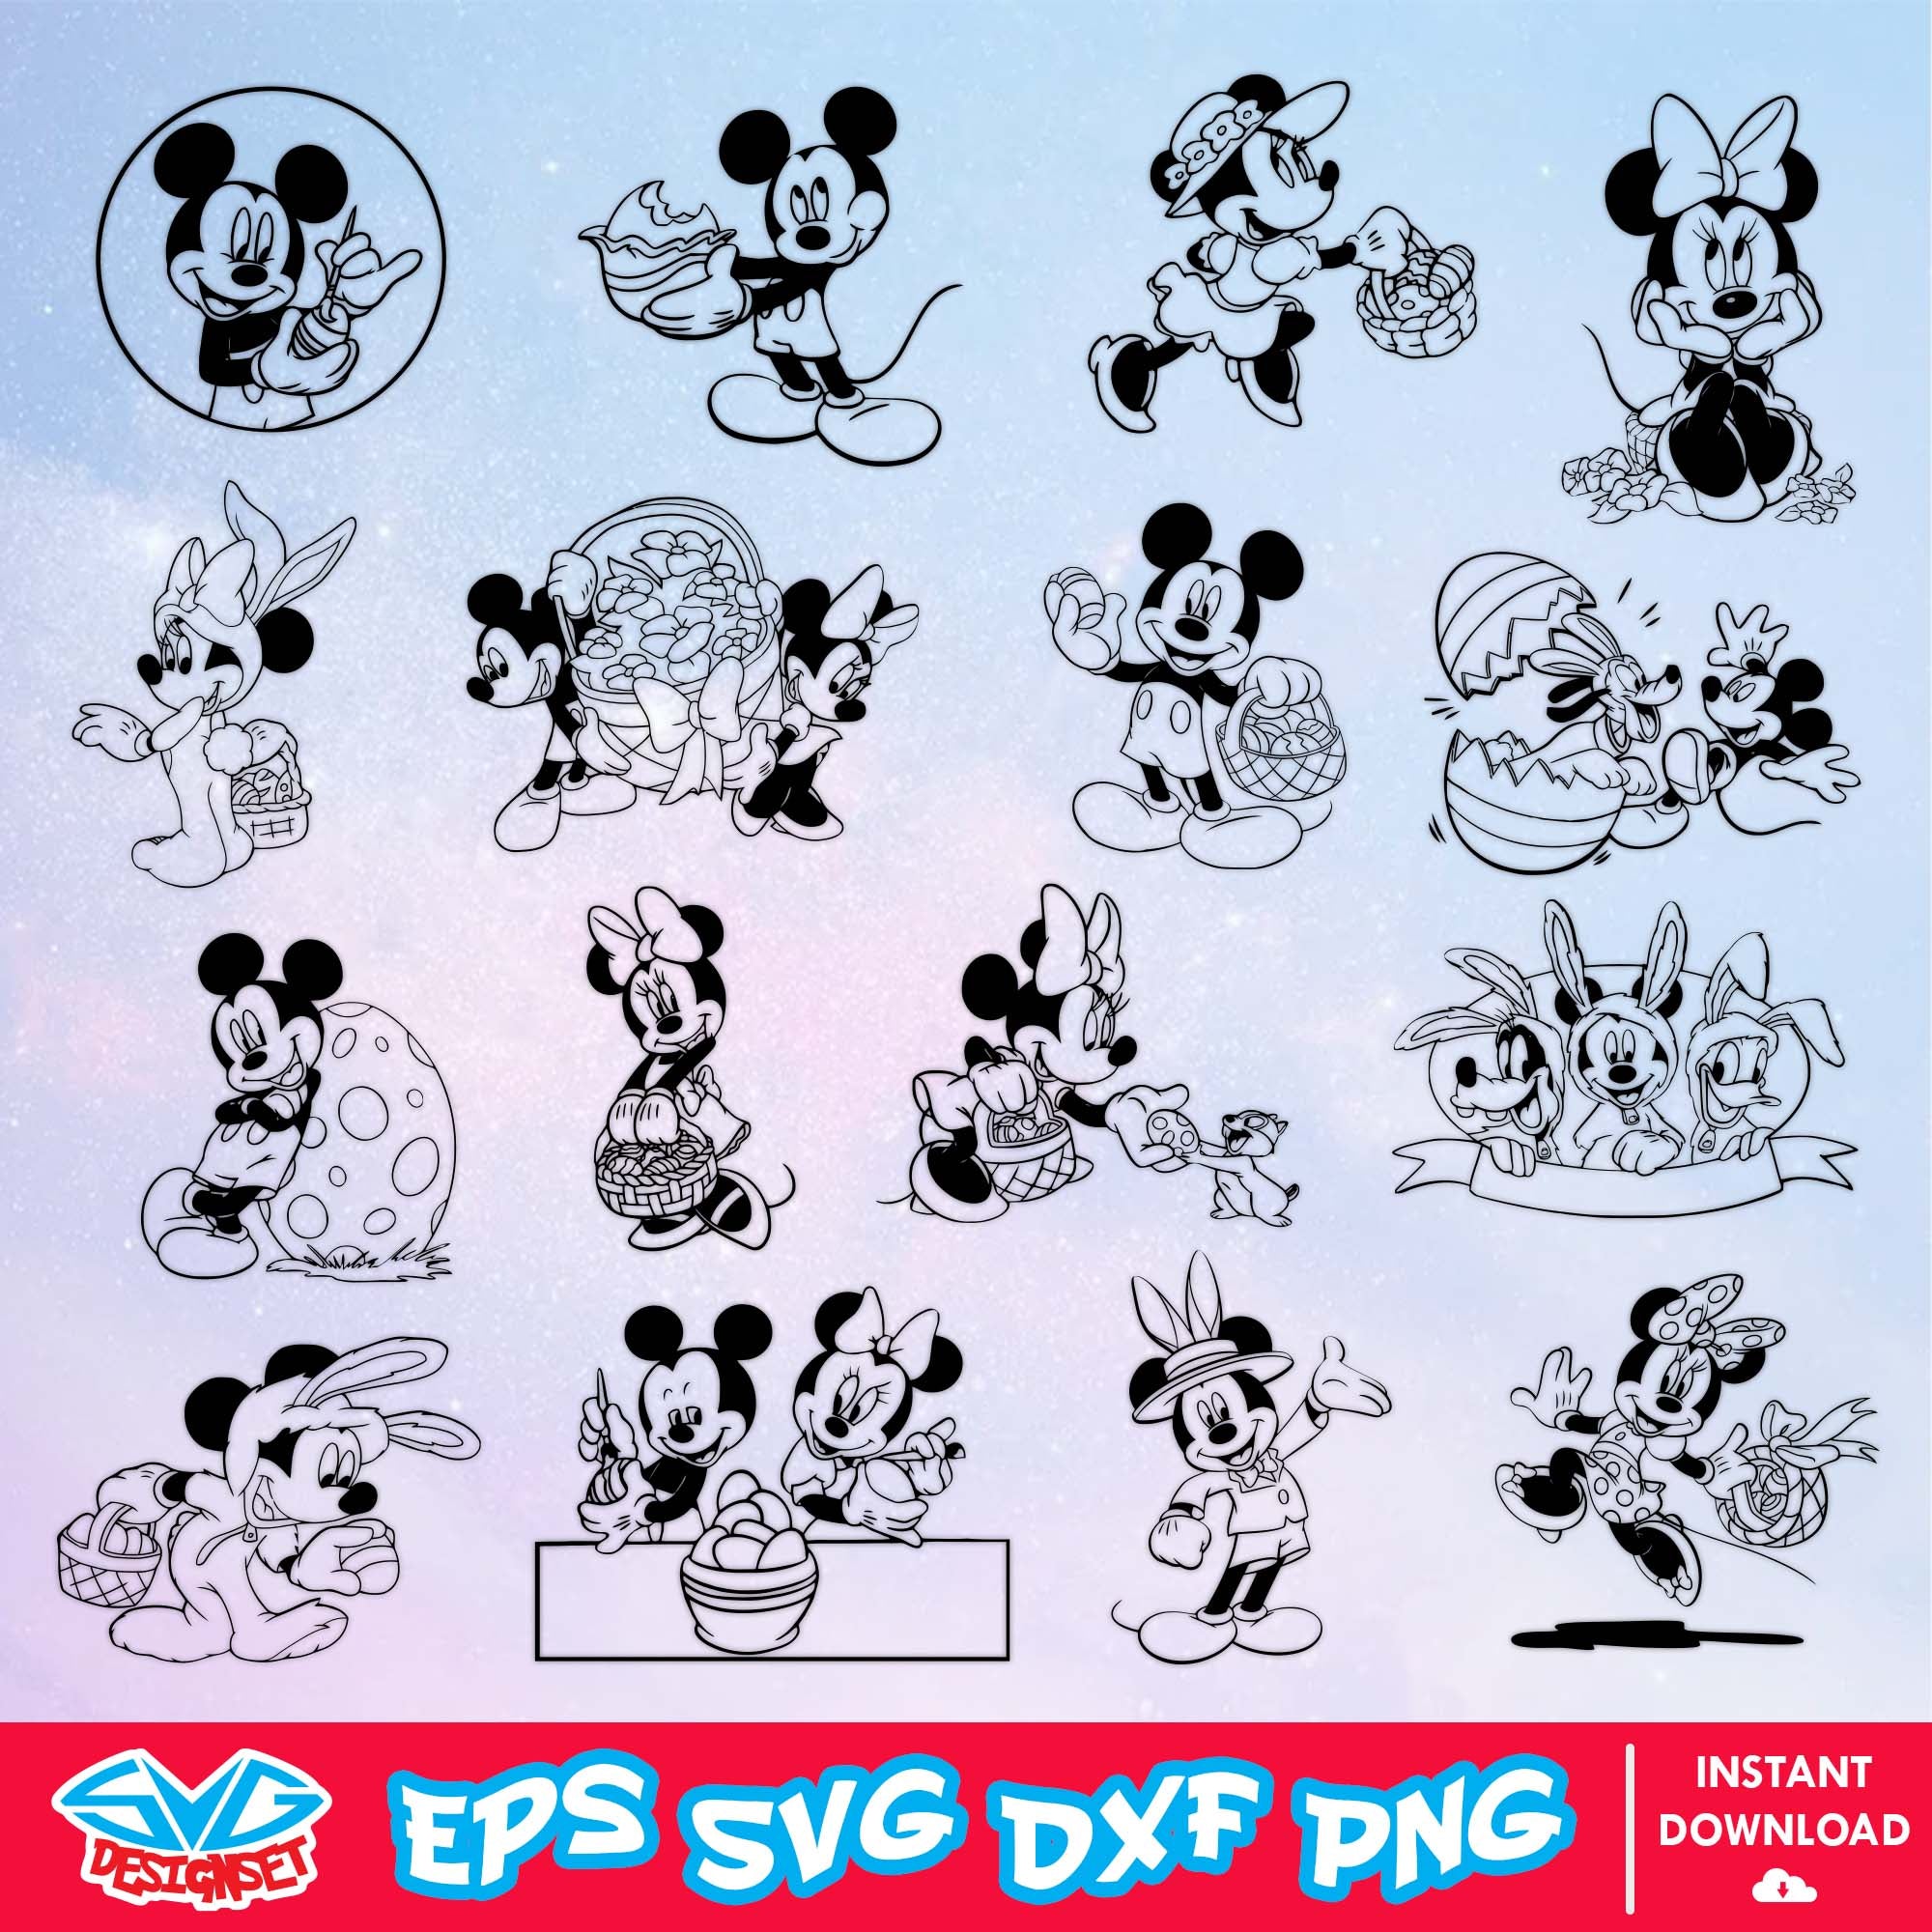 Disney Easter Minnie And Mickey Bundle Svg, Dxf, Eps, Png, Clipart, Silhouette and Cut files for Cricut & Silhouette Cameo #2